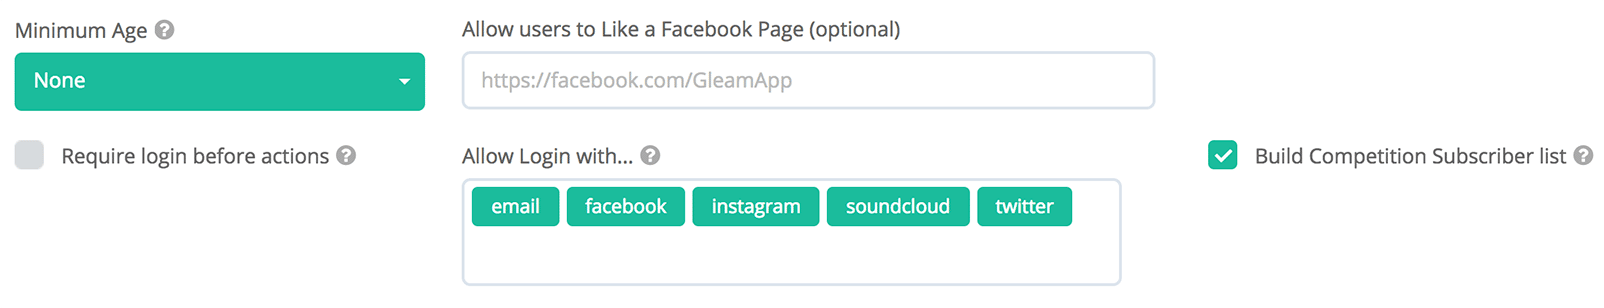 Gleam interface with build competition subscriber list option checked